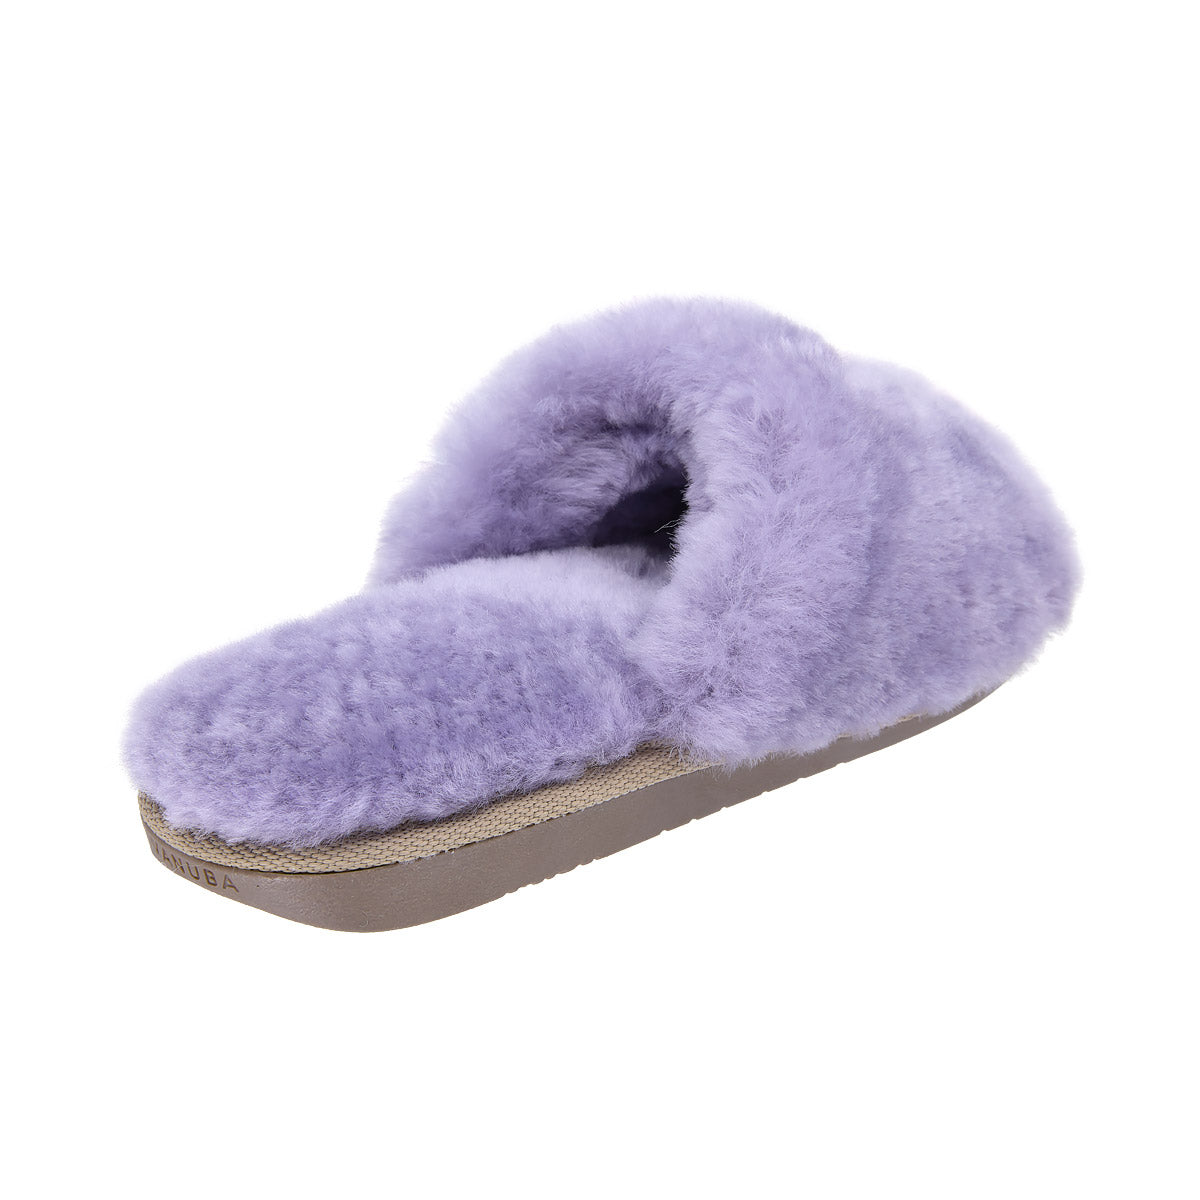 ANOA Lavender sheep slippers